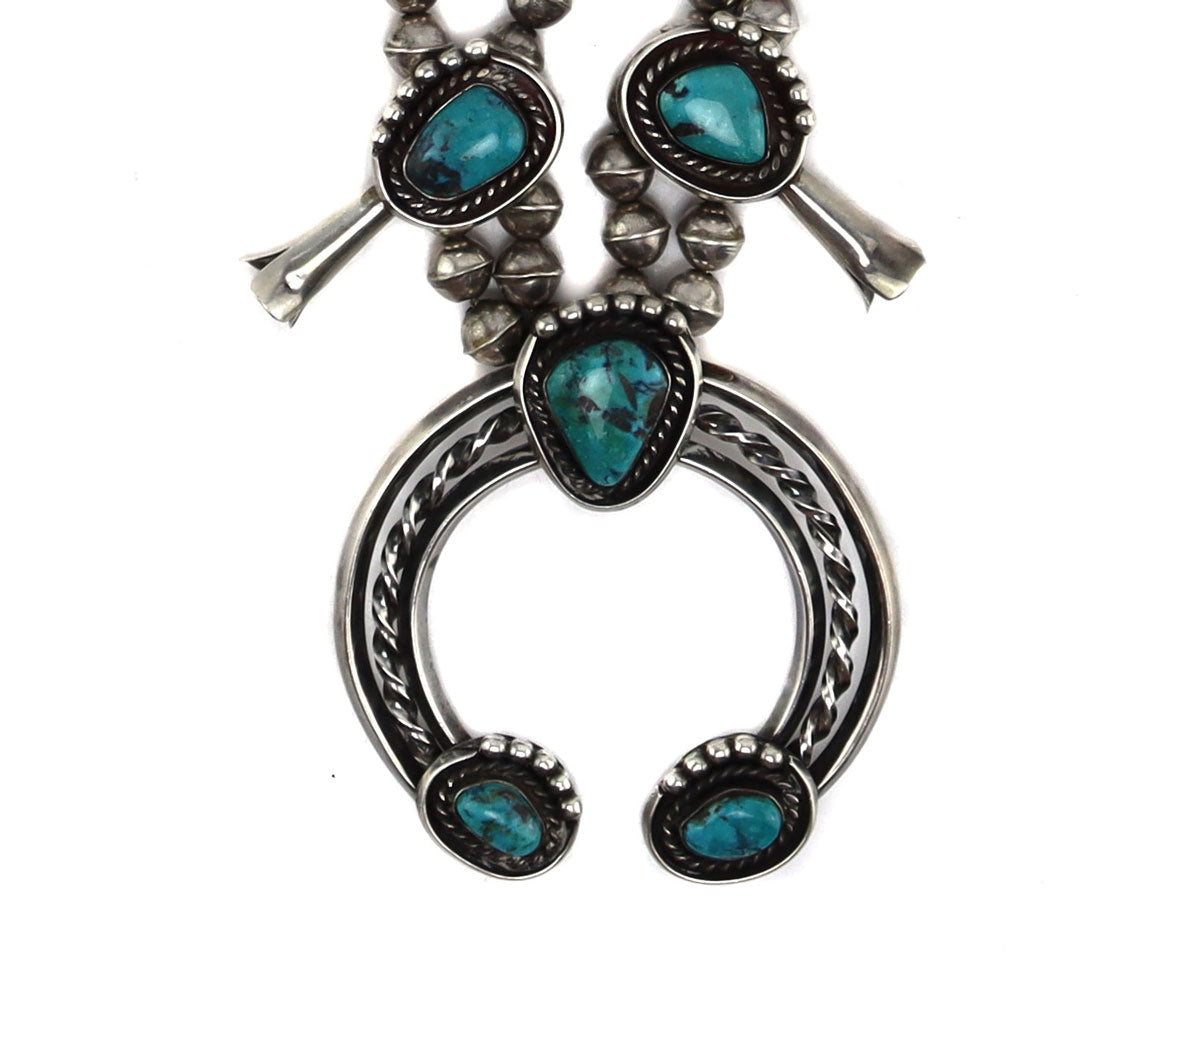 Navajo - Turquoise and Silver Squash Blossom Necklace c. 1950s, 27" length